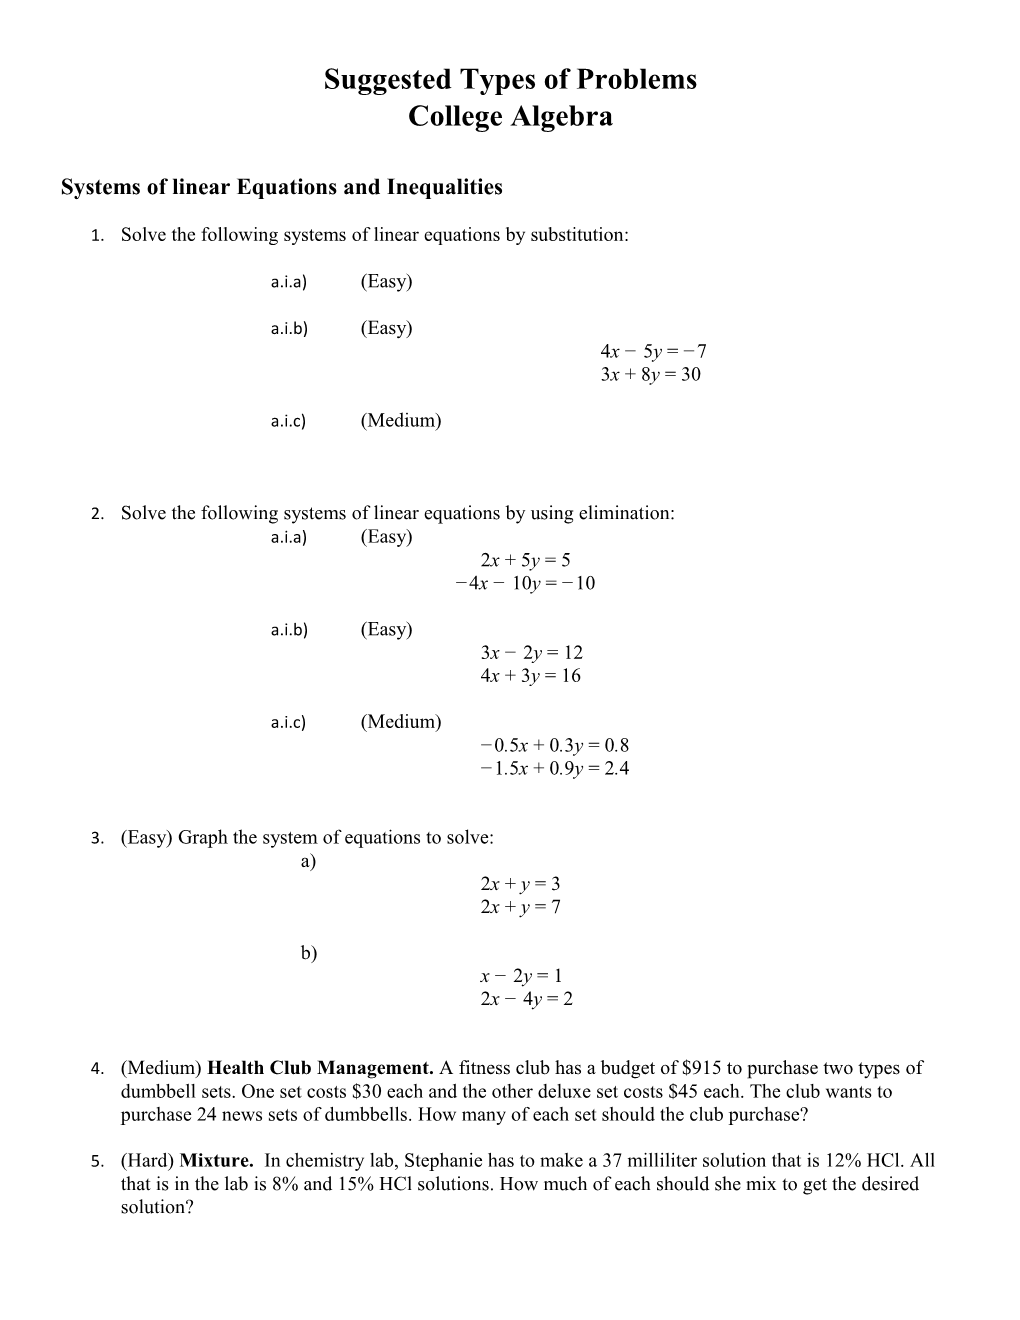 Systems of Linear Equations and Inequalities